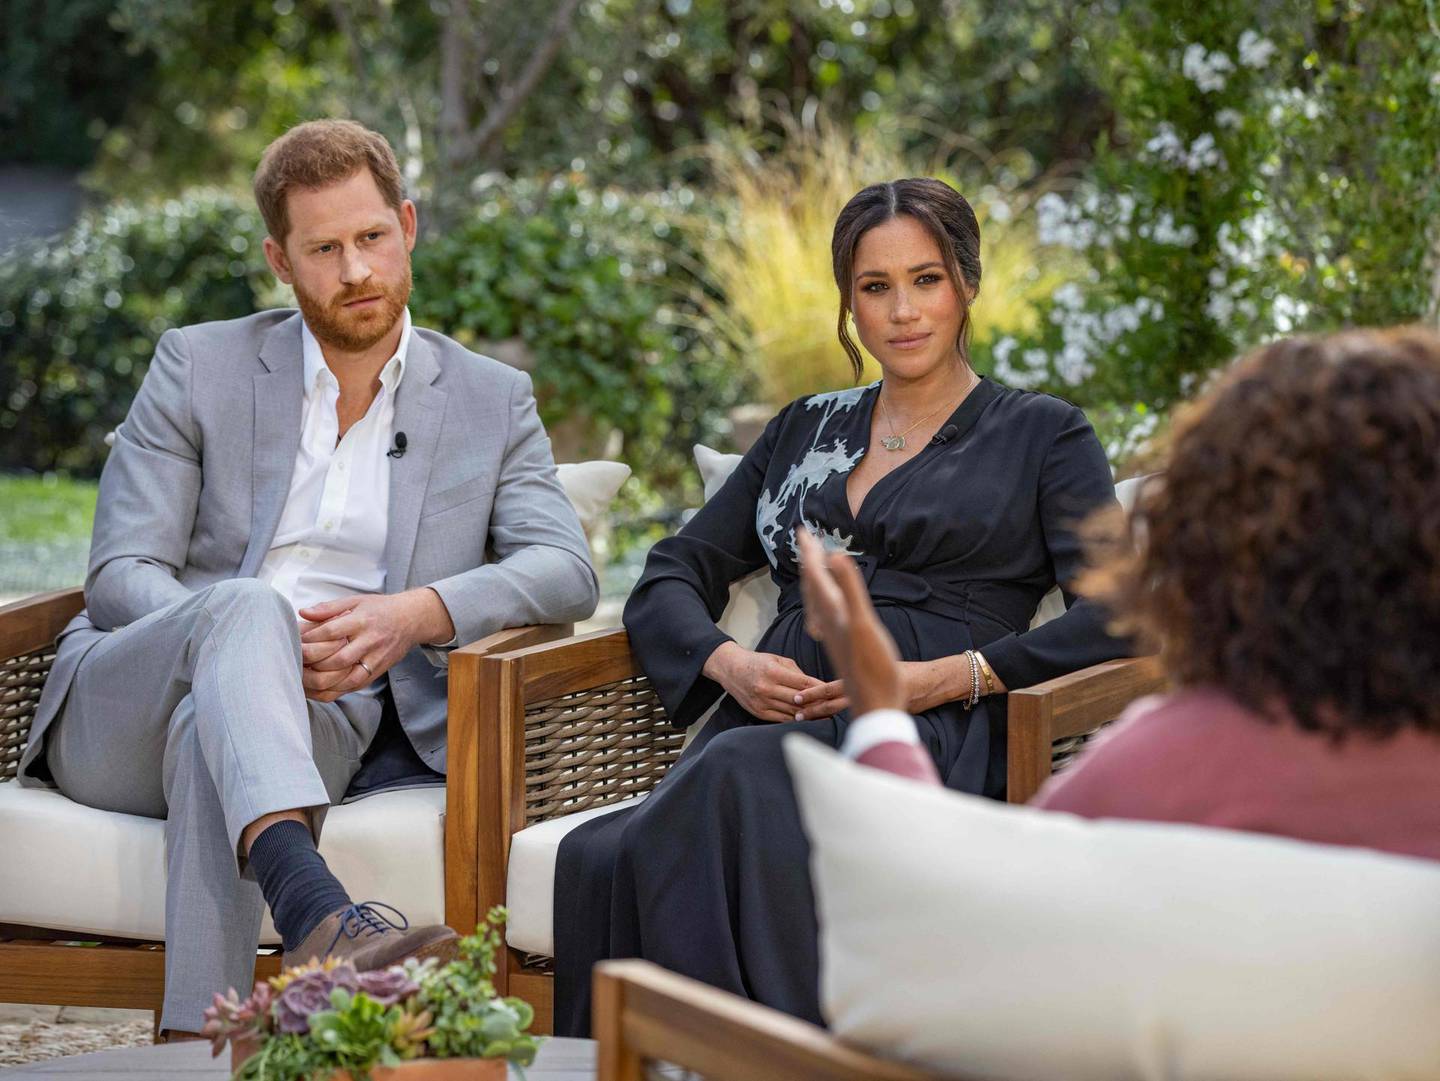 This undated image released March 7, 2021 courtesy of Harpo Productions shows Britain's Prince Harry (L) and his wife Meghan (C), Duchess of Sussex, in a conversation with US television host Oprah Winfrey. Britain's royal family on March 7, 2021 braced for further revelations from Prince Harry and his American wife, Meghan, as a week of transatlantic claim and counter-claim reaches a climax with the broadcast of their interview with Oprah Winfrey. The two-hour interview with the US TV queen is the biggest royal tell-all since Harry's mother princess Diana detailed her crumbling marriage to his father Prince Charles in 1995.  - RESTRICTED TO EDITORIAL USE - MANDATORY CREDIT 